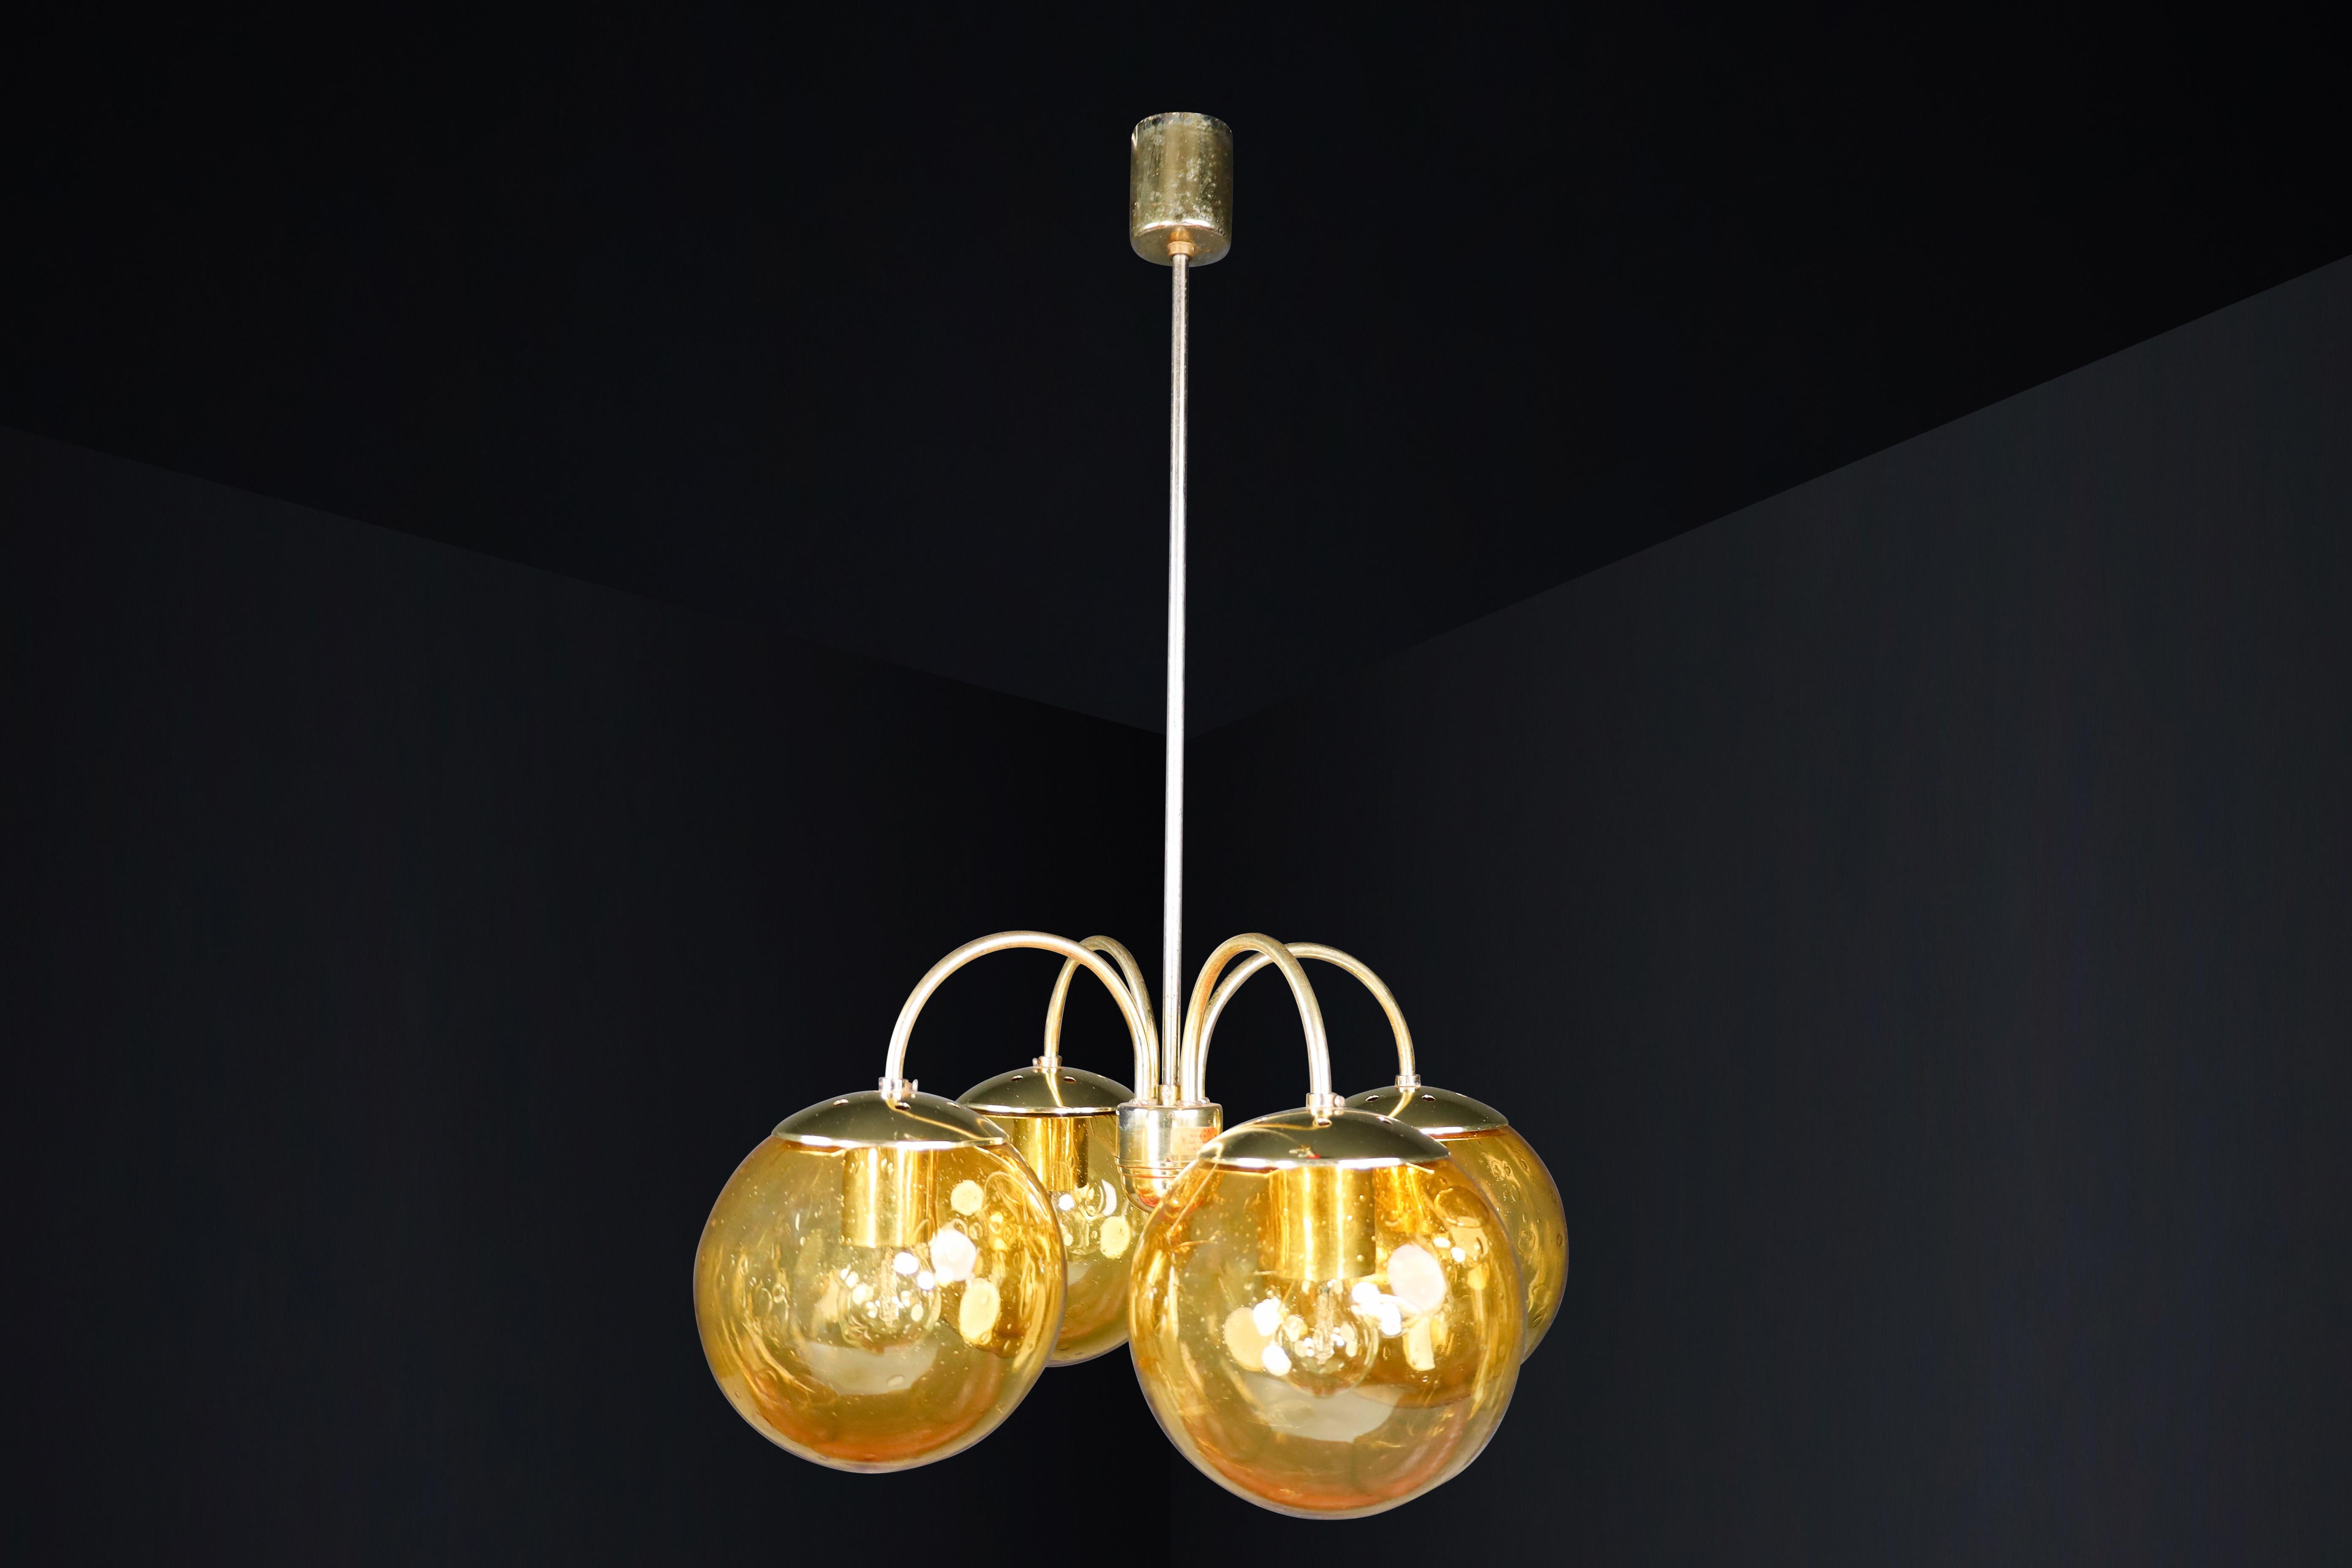 Midcentury Chandeliers in Brass and Amber-Colored Glass Czech Republic, 1960s For Sale 2